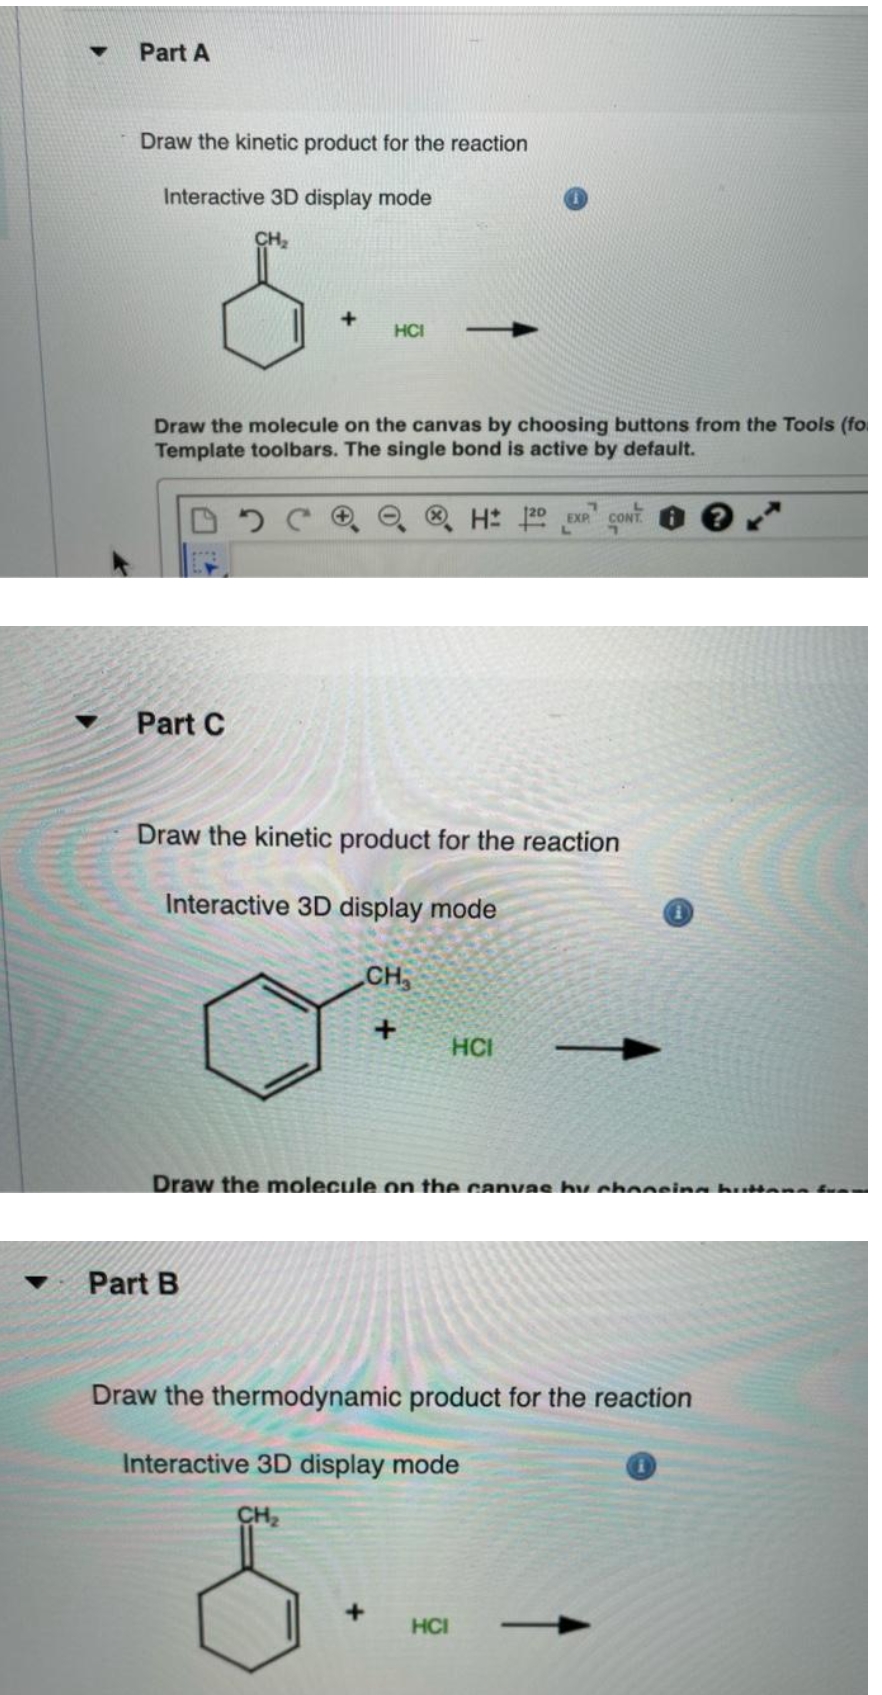 Part A
Draw the kinetic product for the reaction
Interactive 3D display mode
CH,
+
HCI
Draw the molecule on the canvas by choosing buttons from the Tools (fo
Template toolbars. The single bond is active by default.
O ® H 20 EXR CONT.
Part C
Draw the kinetic product for the reaction
Interactive 3D display mode
CH
HCI
Draw the molecule on the canvas hy cboosing h an f
Part B
Draw the thermodynamic product for the reaction
Interactive 3D display mode
CH2
HCI
